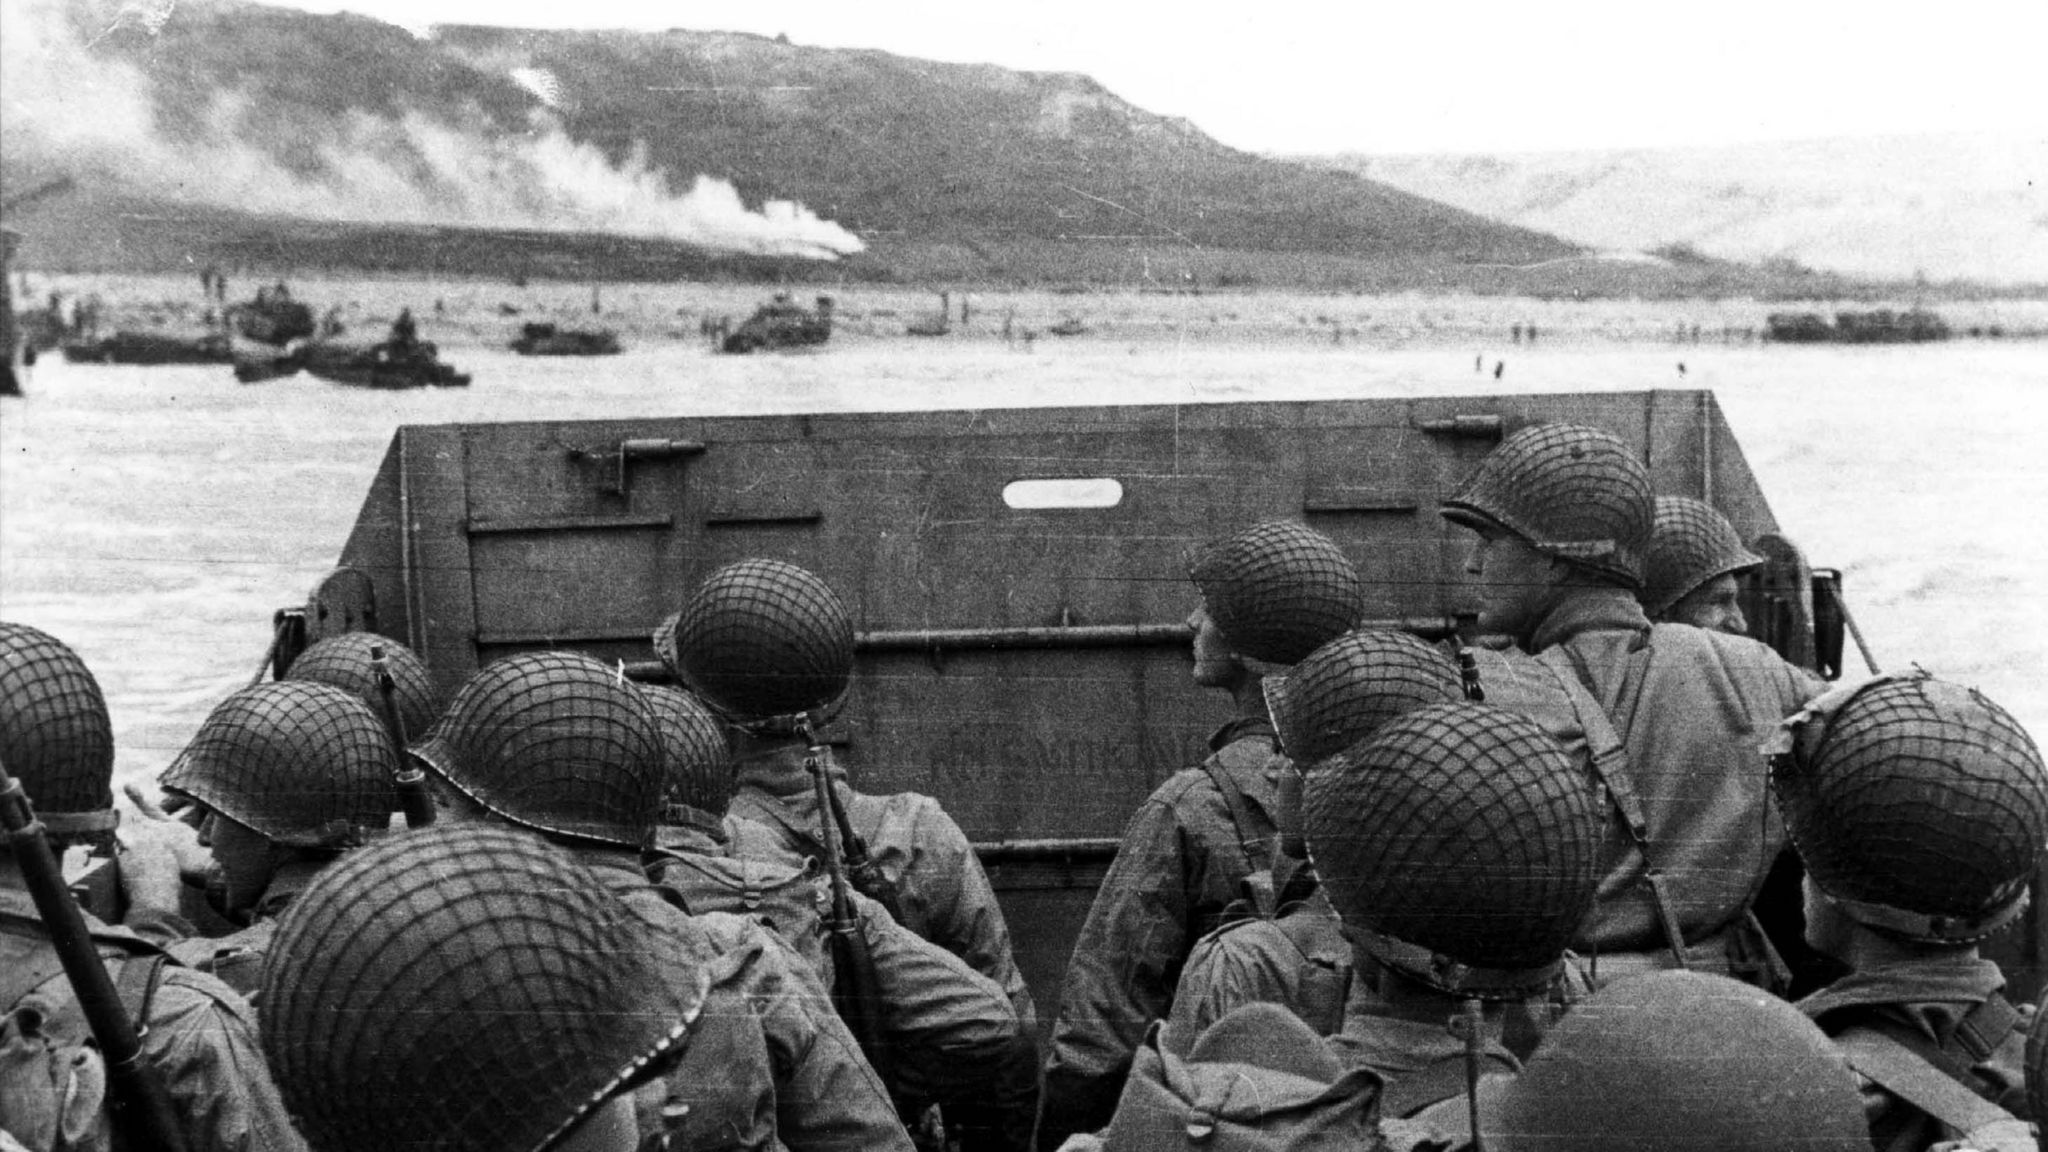 U.S. Army troops (soldiers) in an LCVP landing craft approach Normandy"s Omaha Beach on D-Day in Colleville Sur-Mer, France June 6 1944